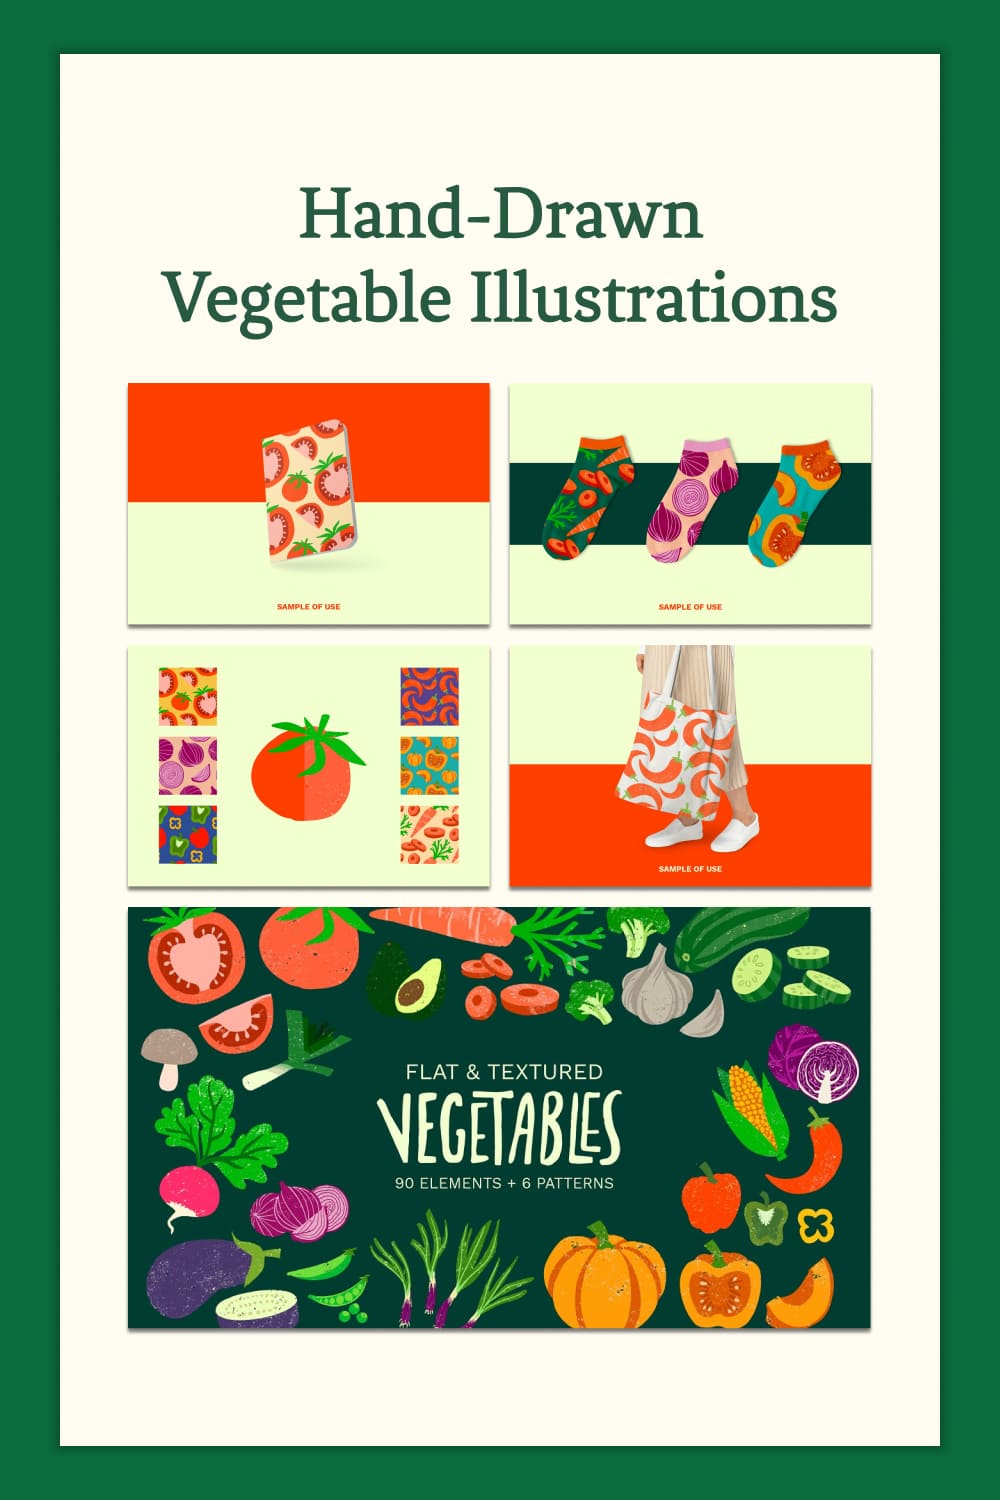 Hand drawn vegetable illustrations - pinterest image preview.